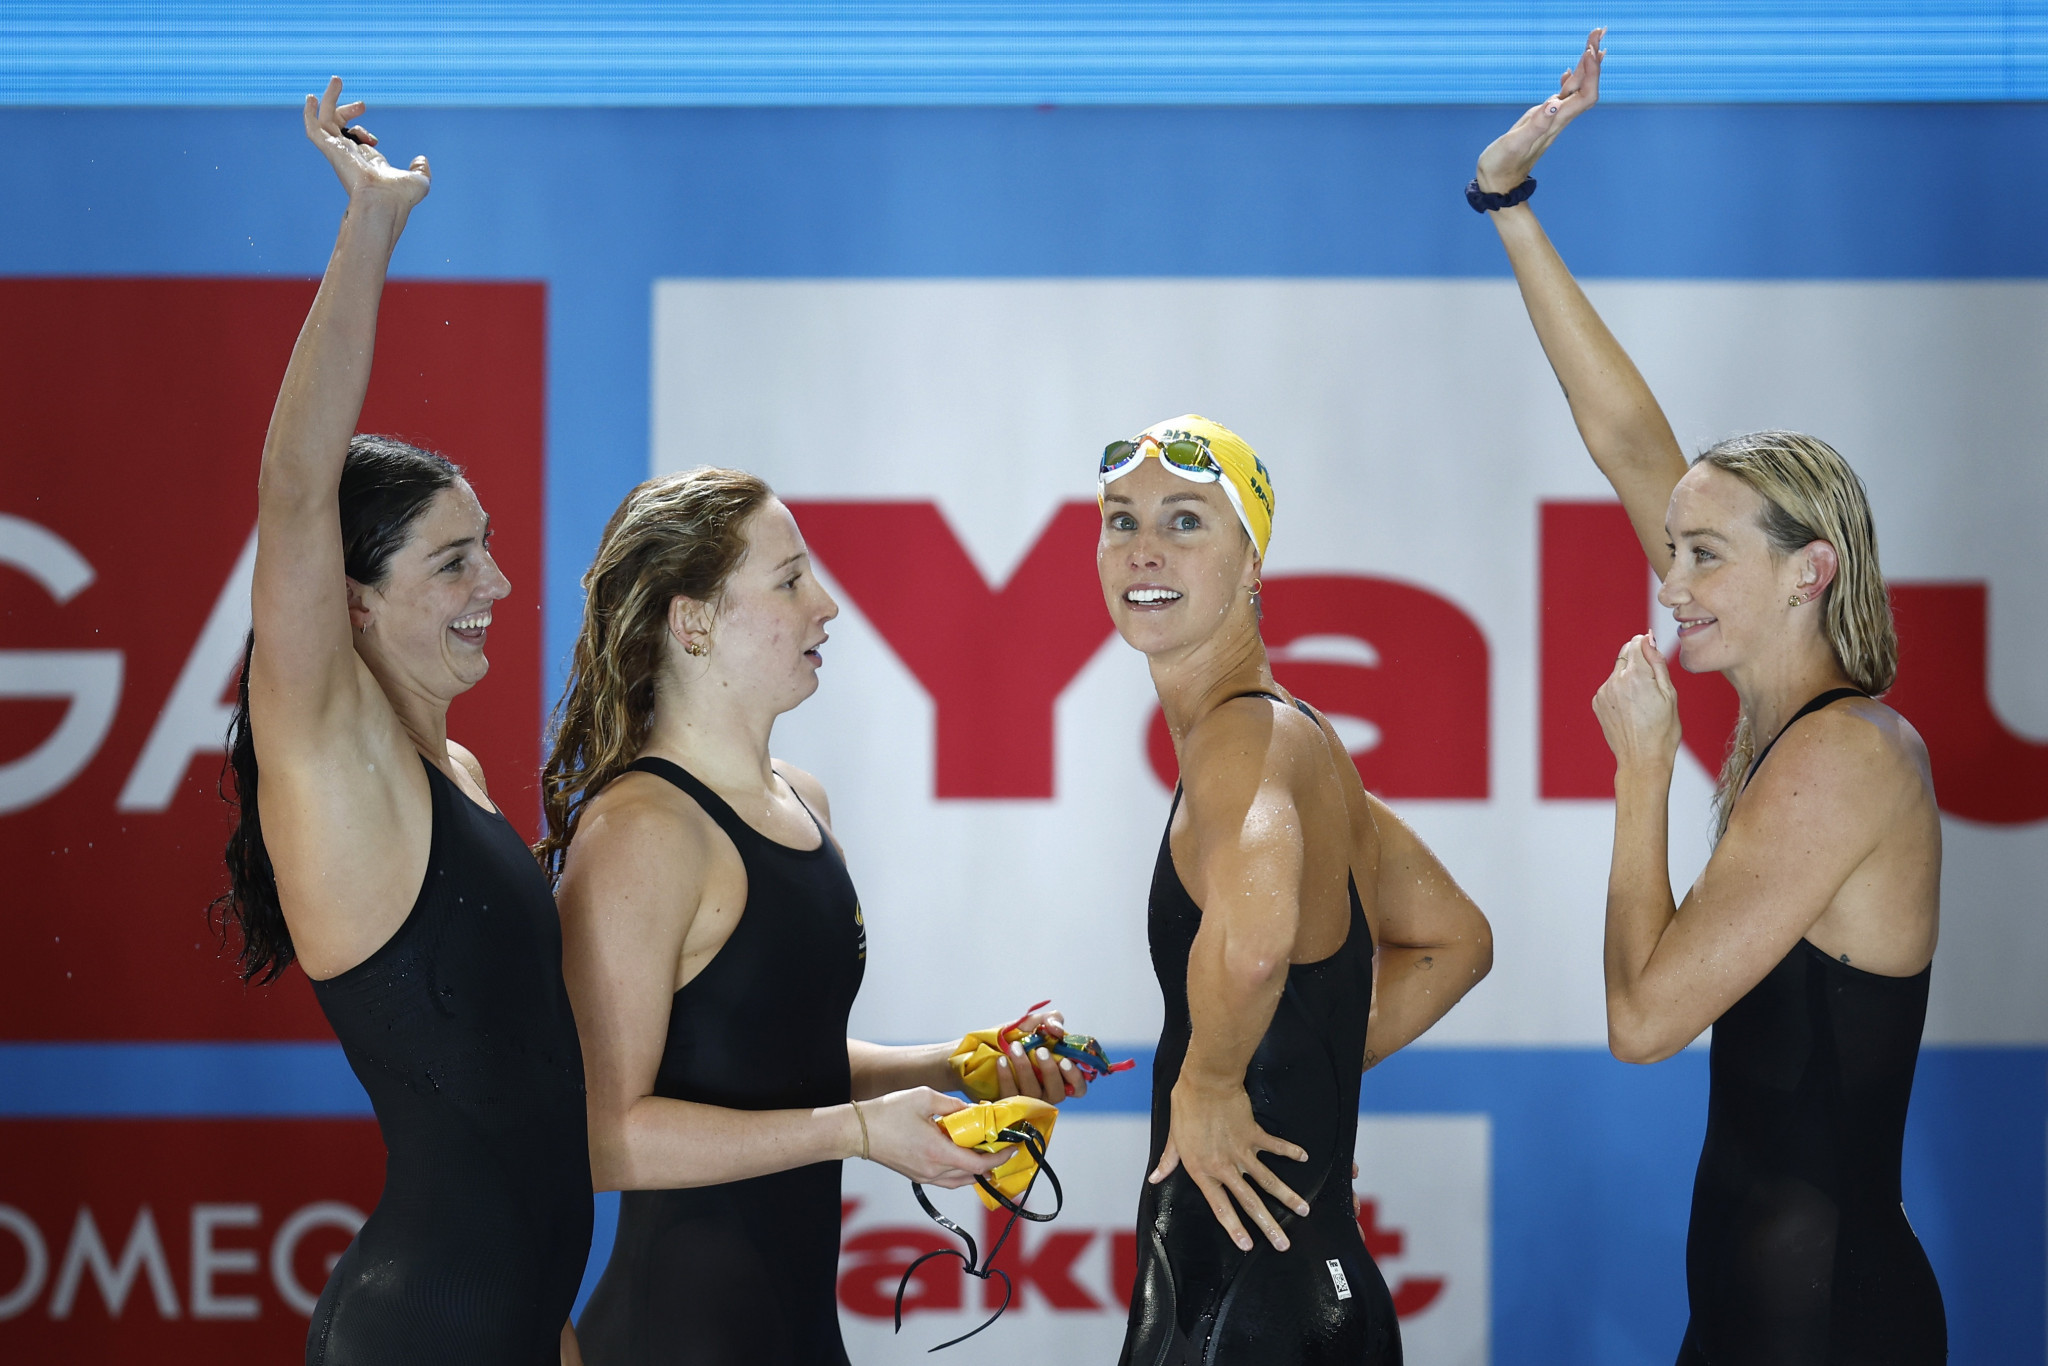 Two world records broken on first day of World Swimming Championships (25m)